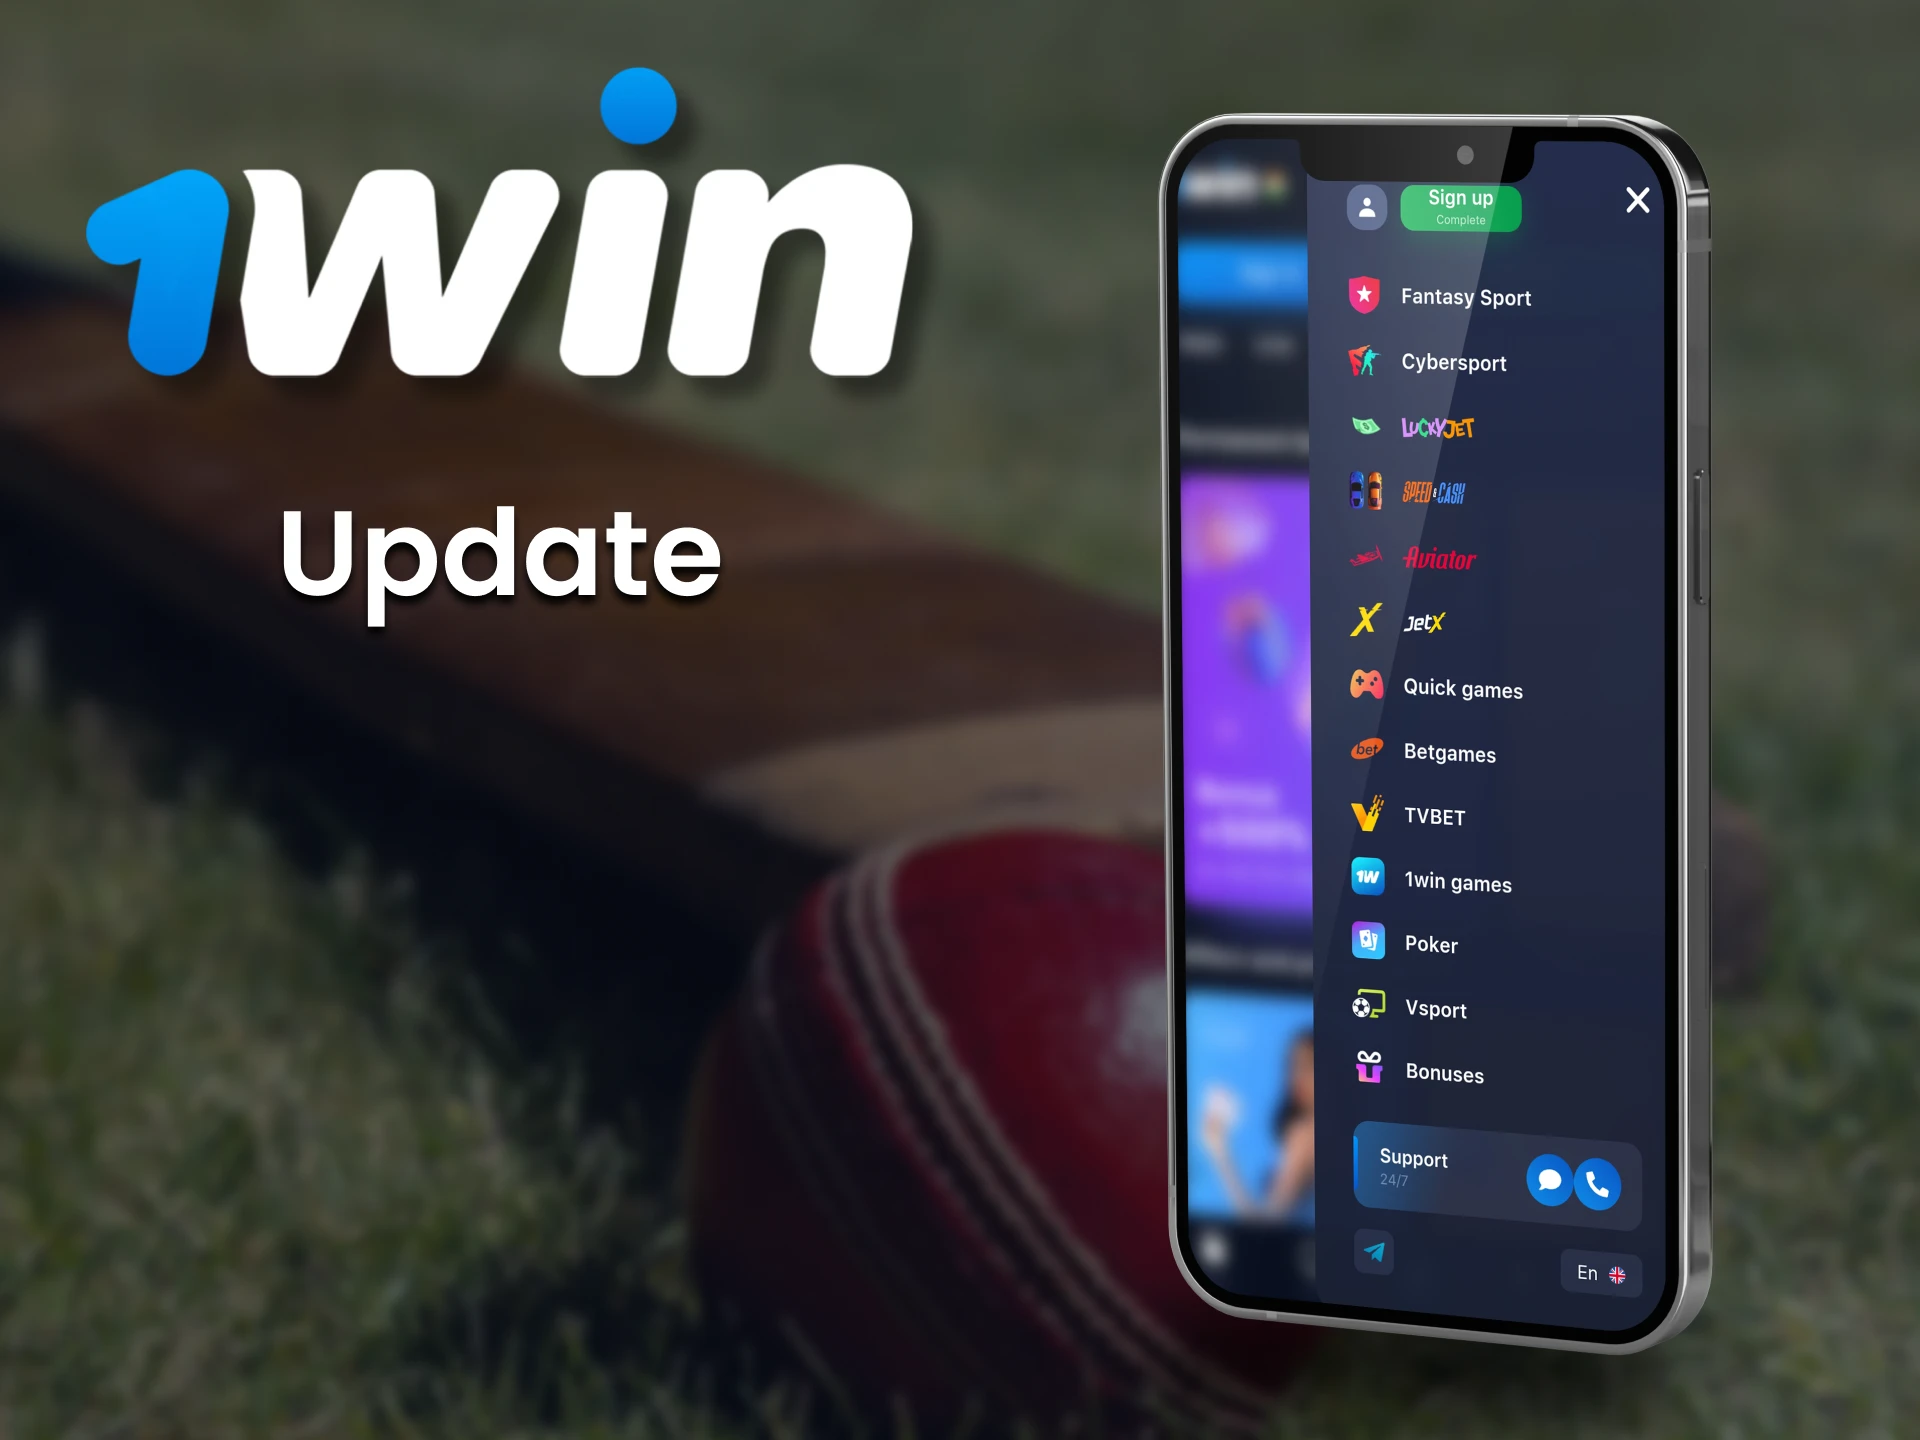 Update the 1win app to the latest version for better performance.